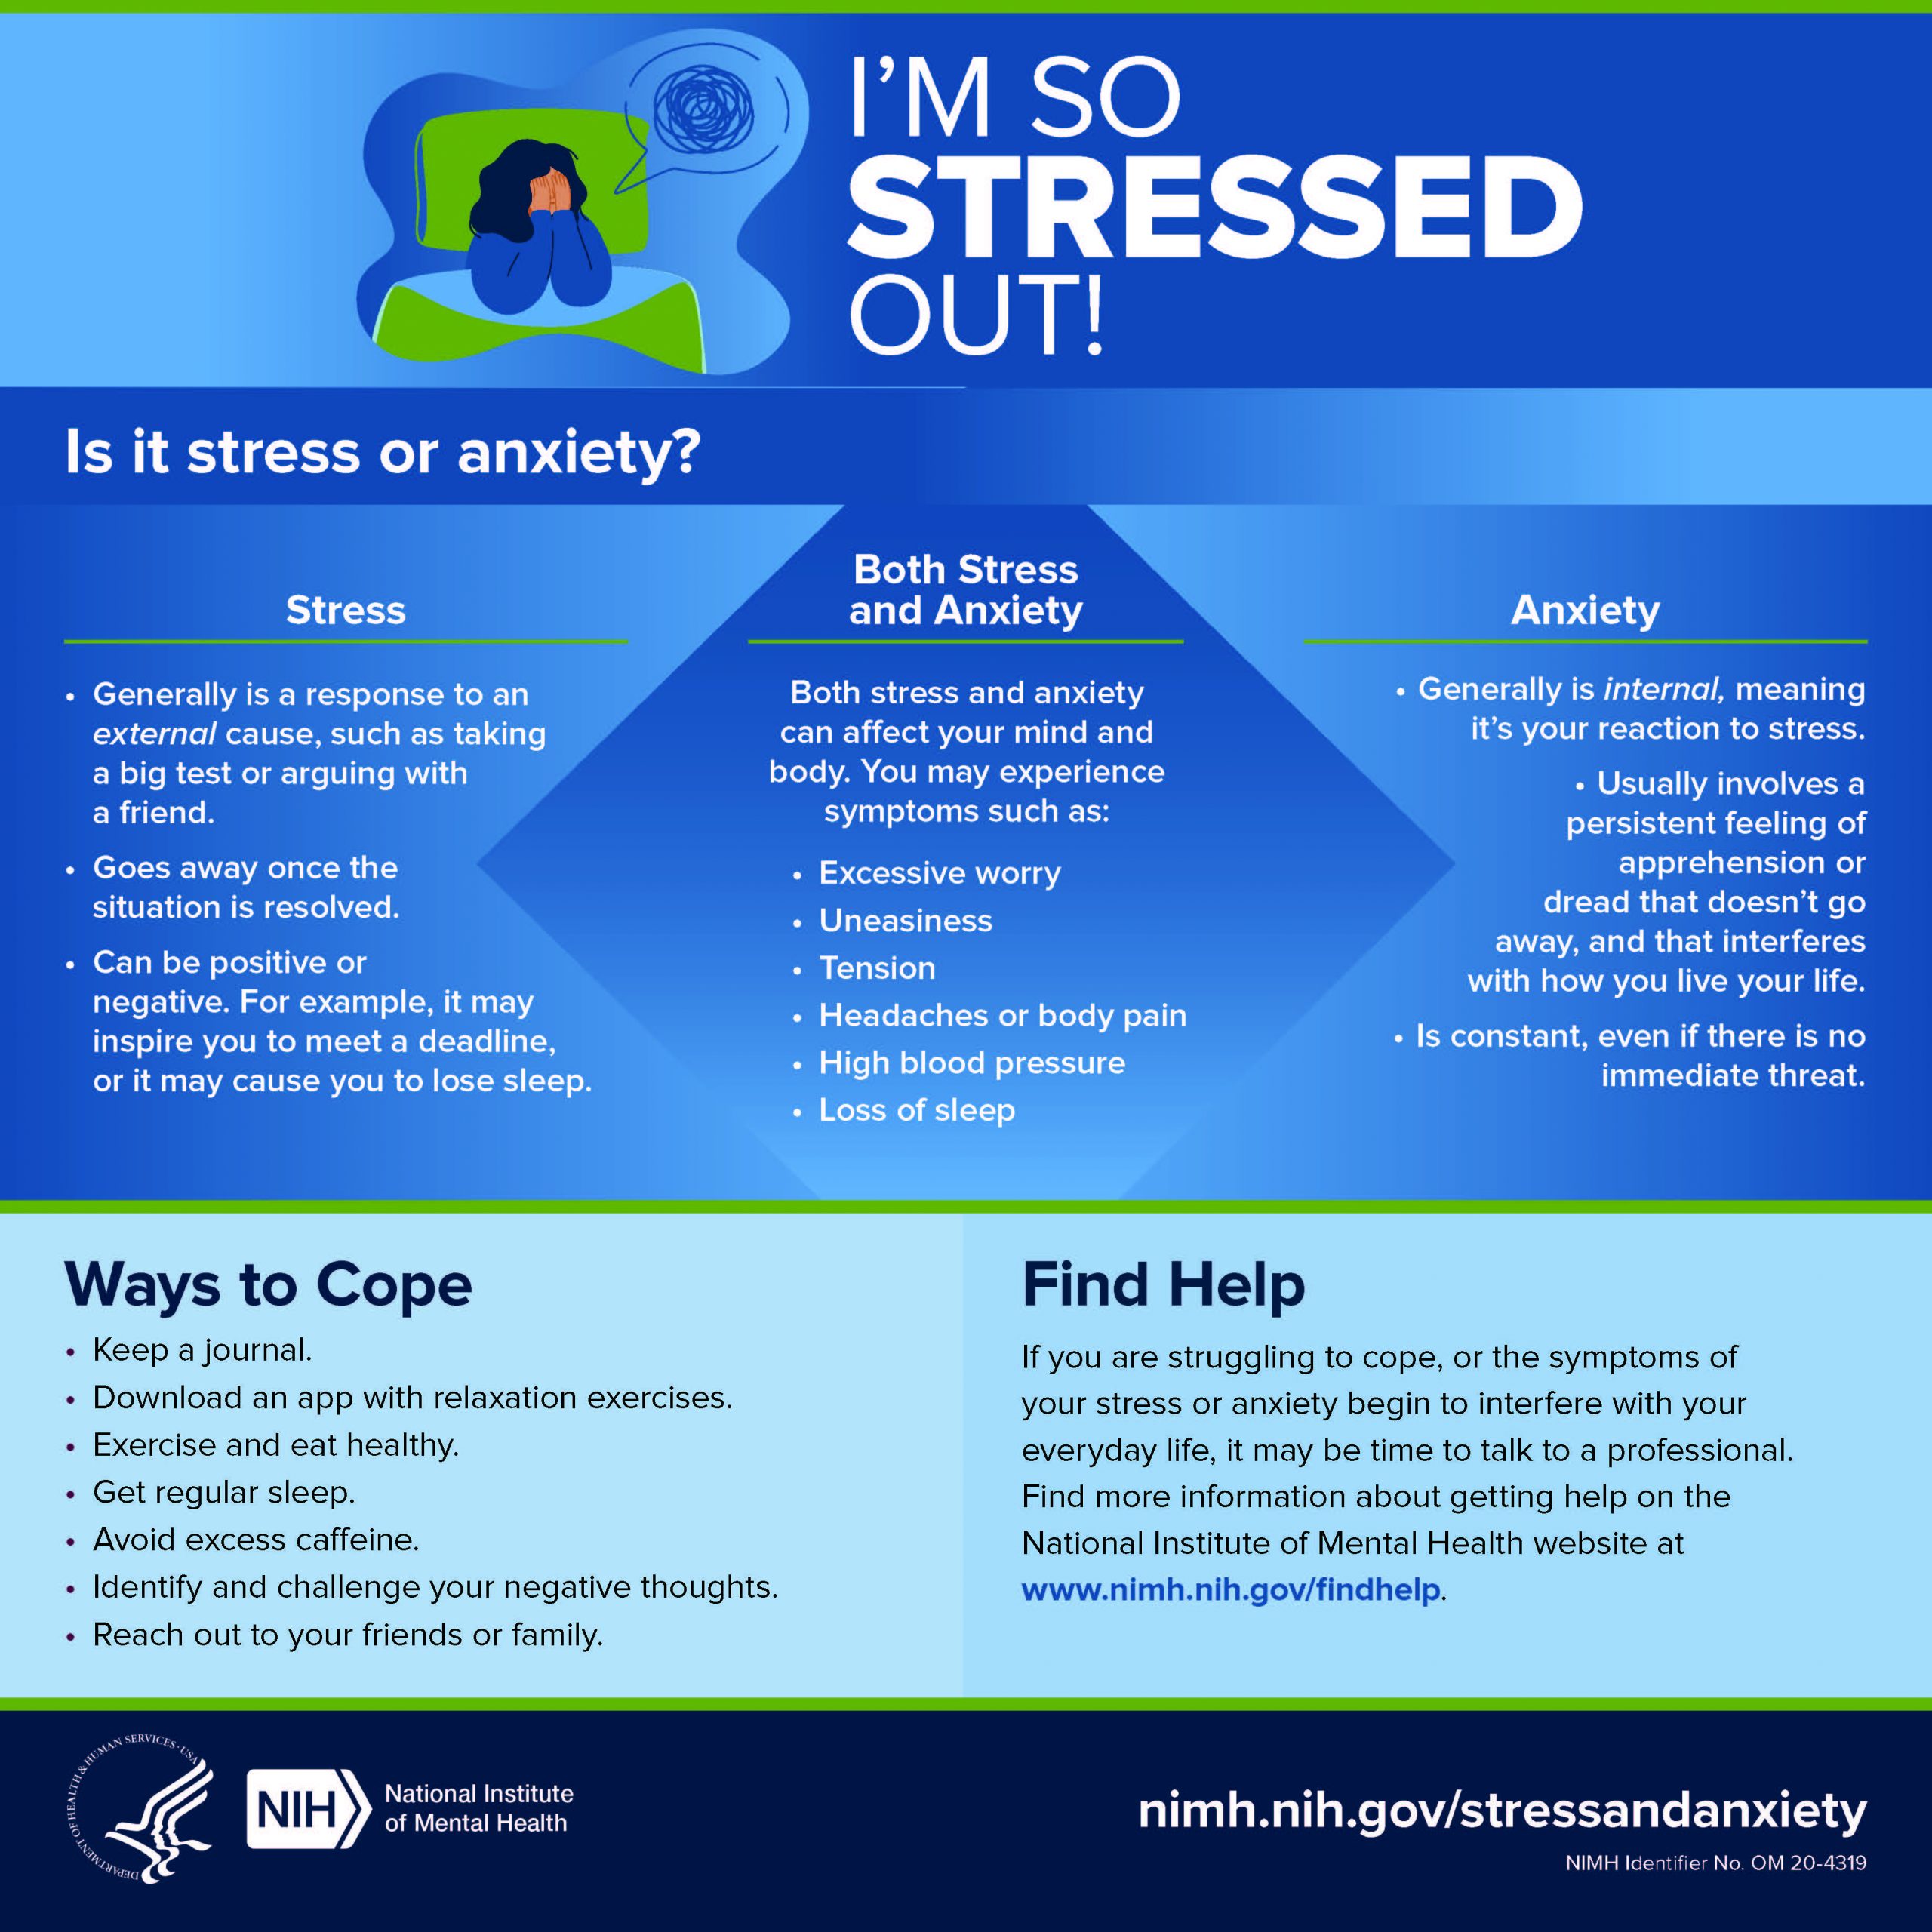 I'm So Stressed Out! Infographic, click for full PDF